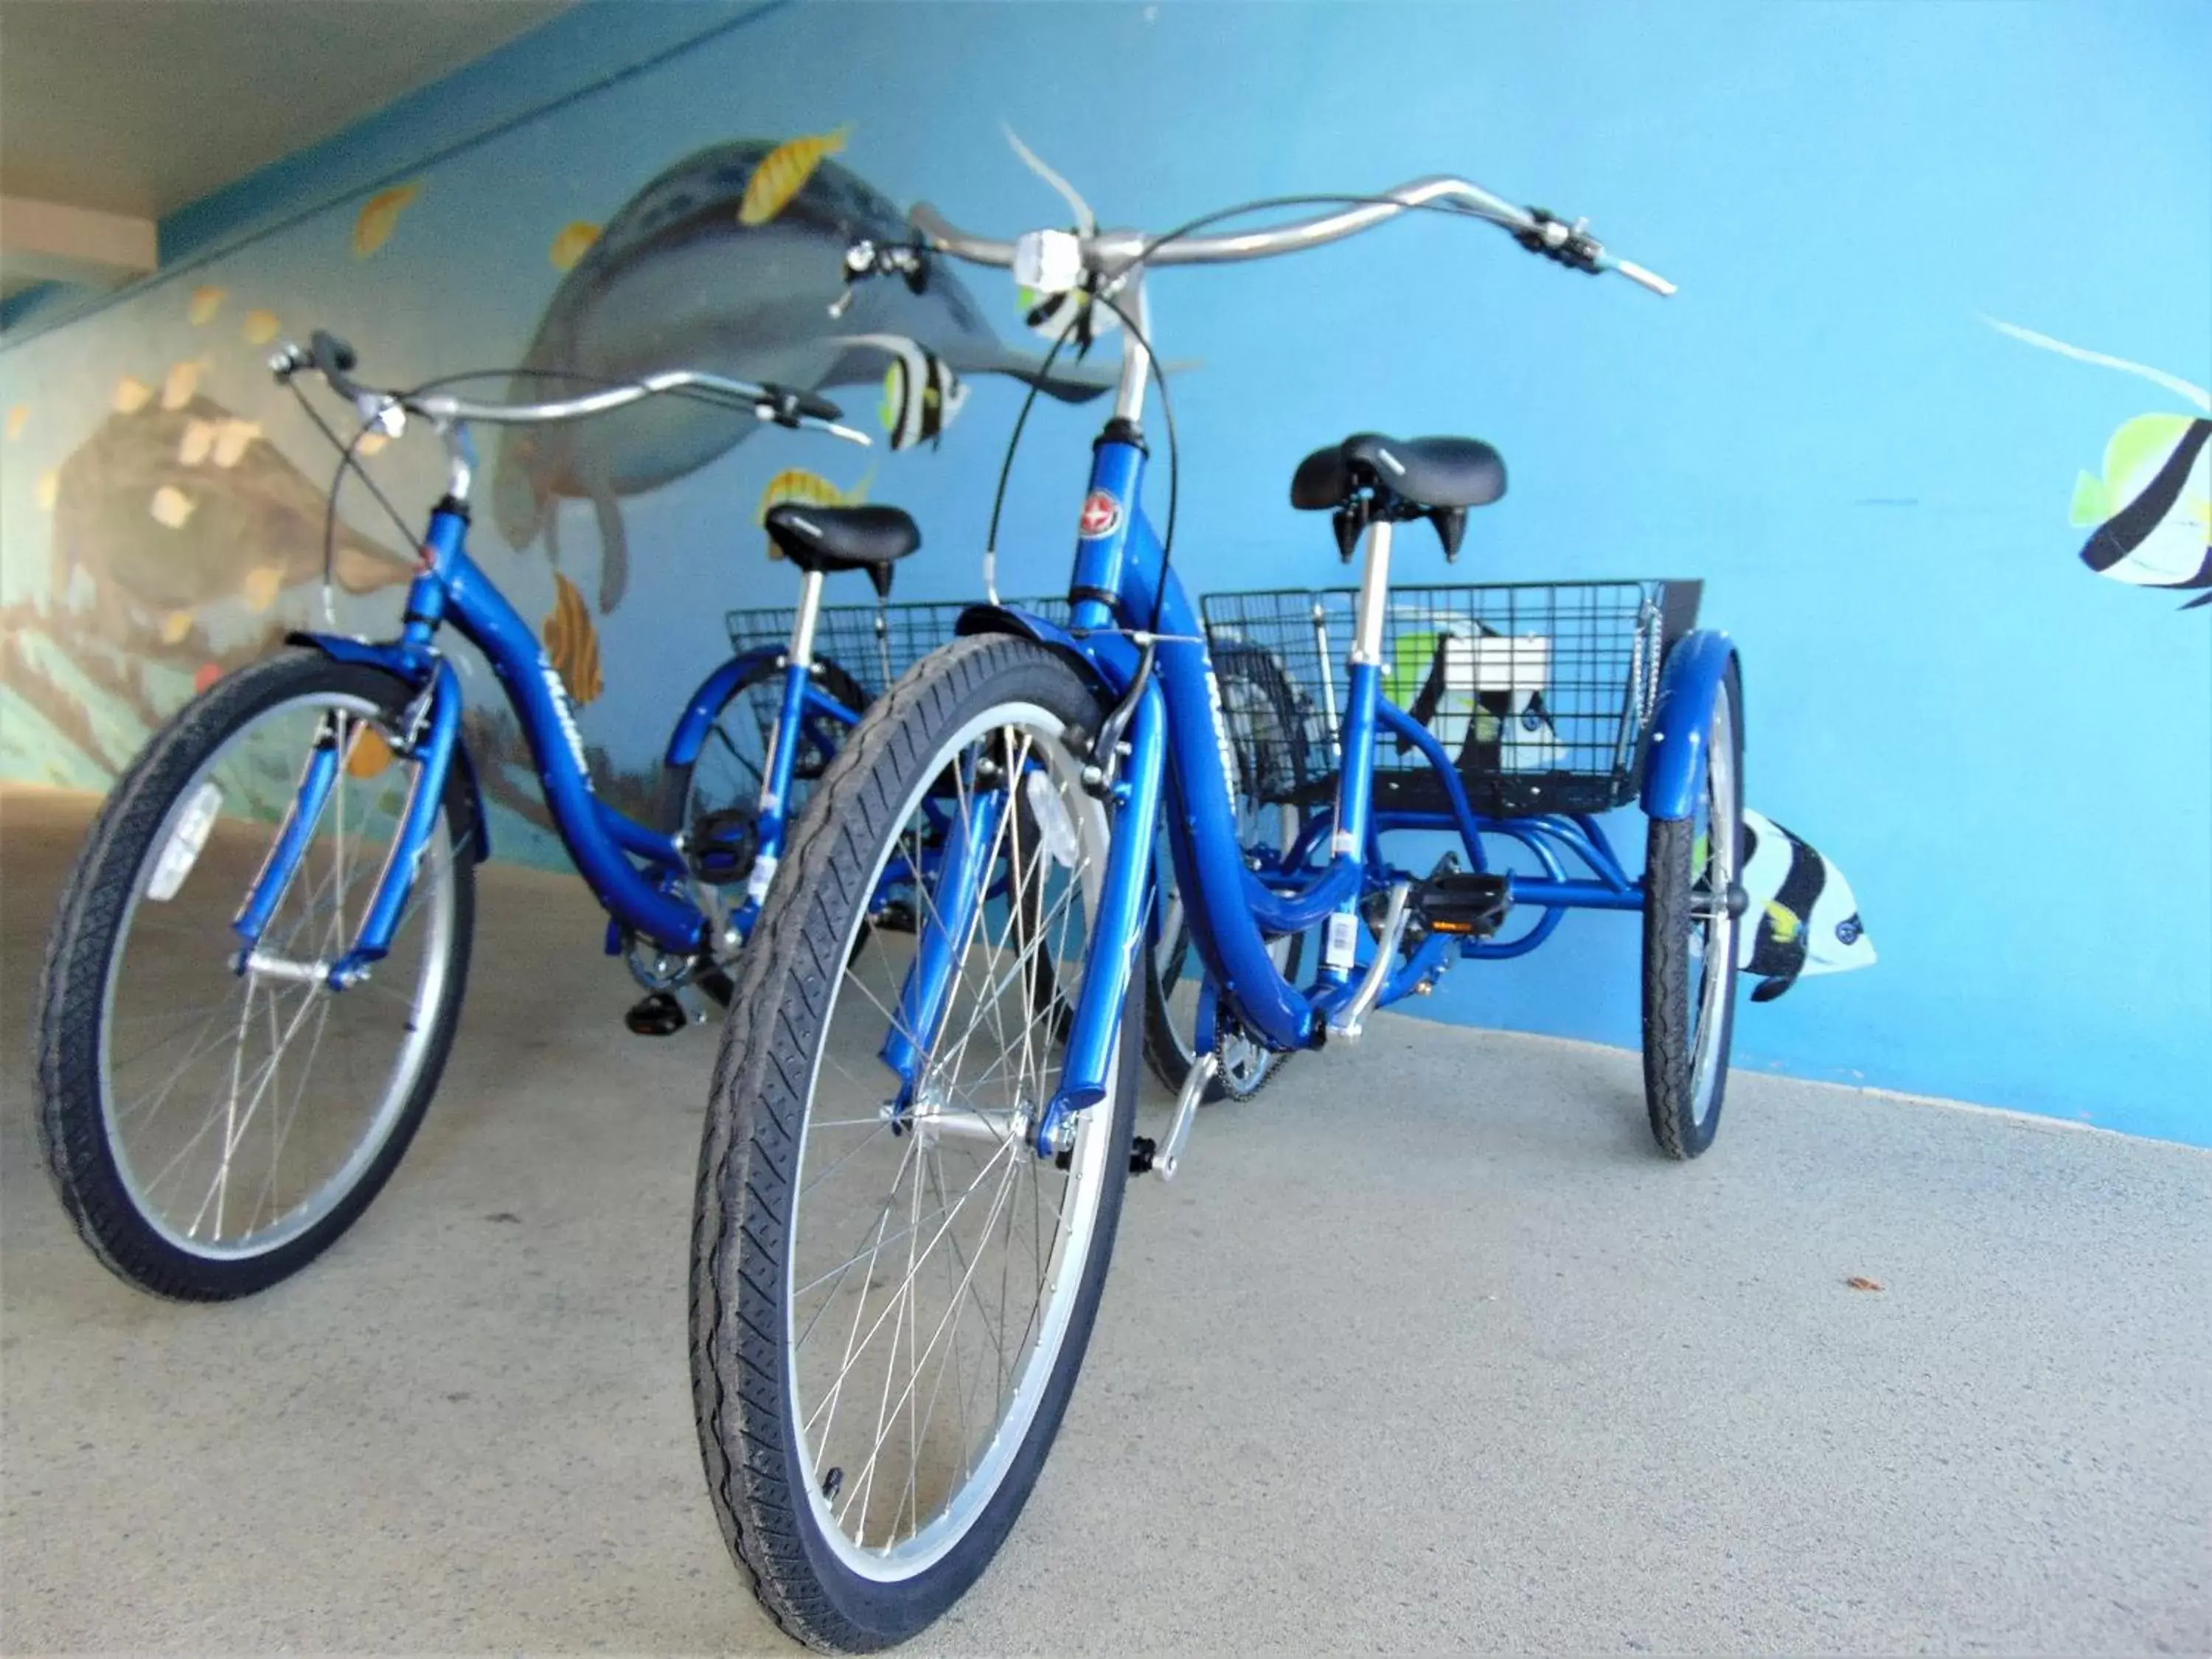 Cycling, Other Activities in Dolphin Key Resort - Cape Coral